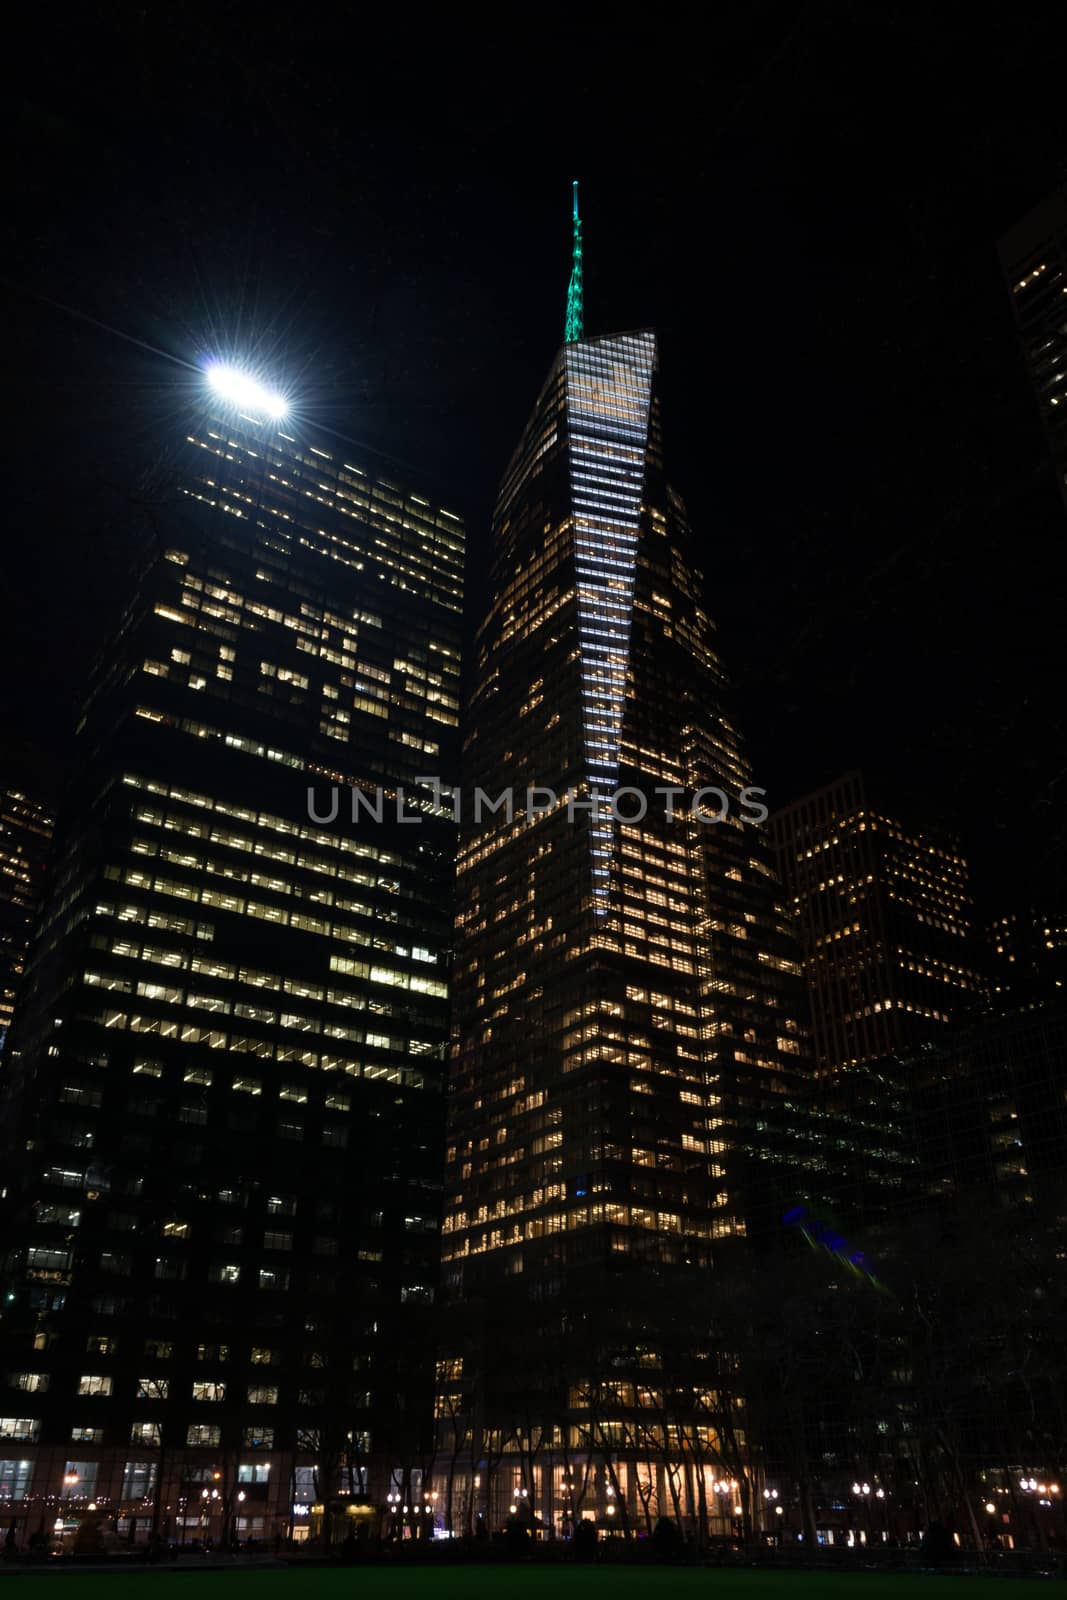 Darkness by Bryant Park by rmbarricarte